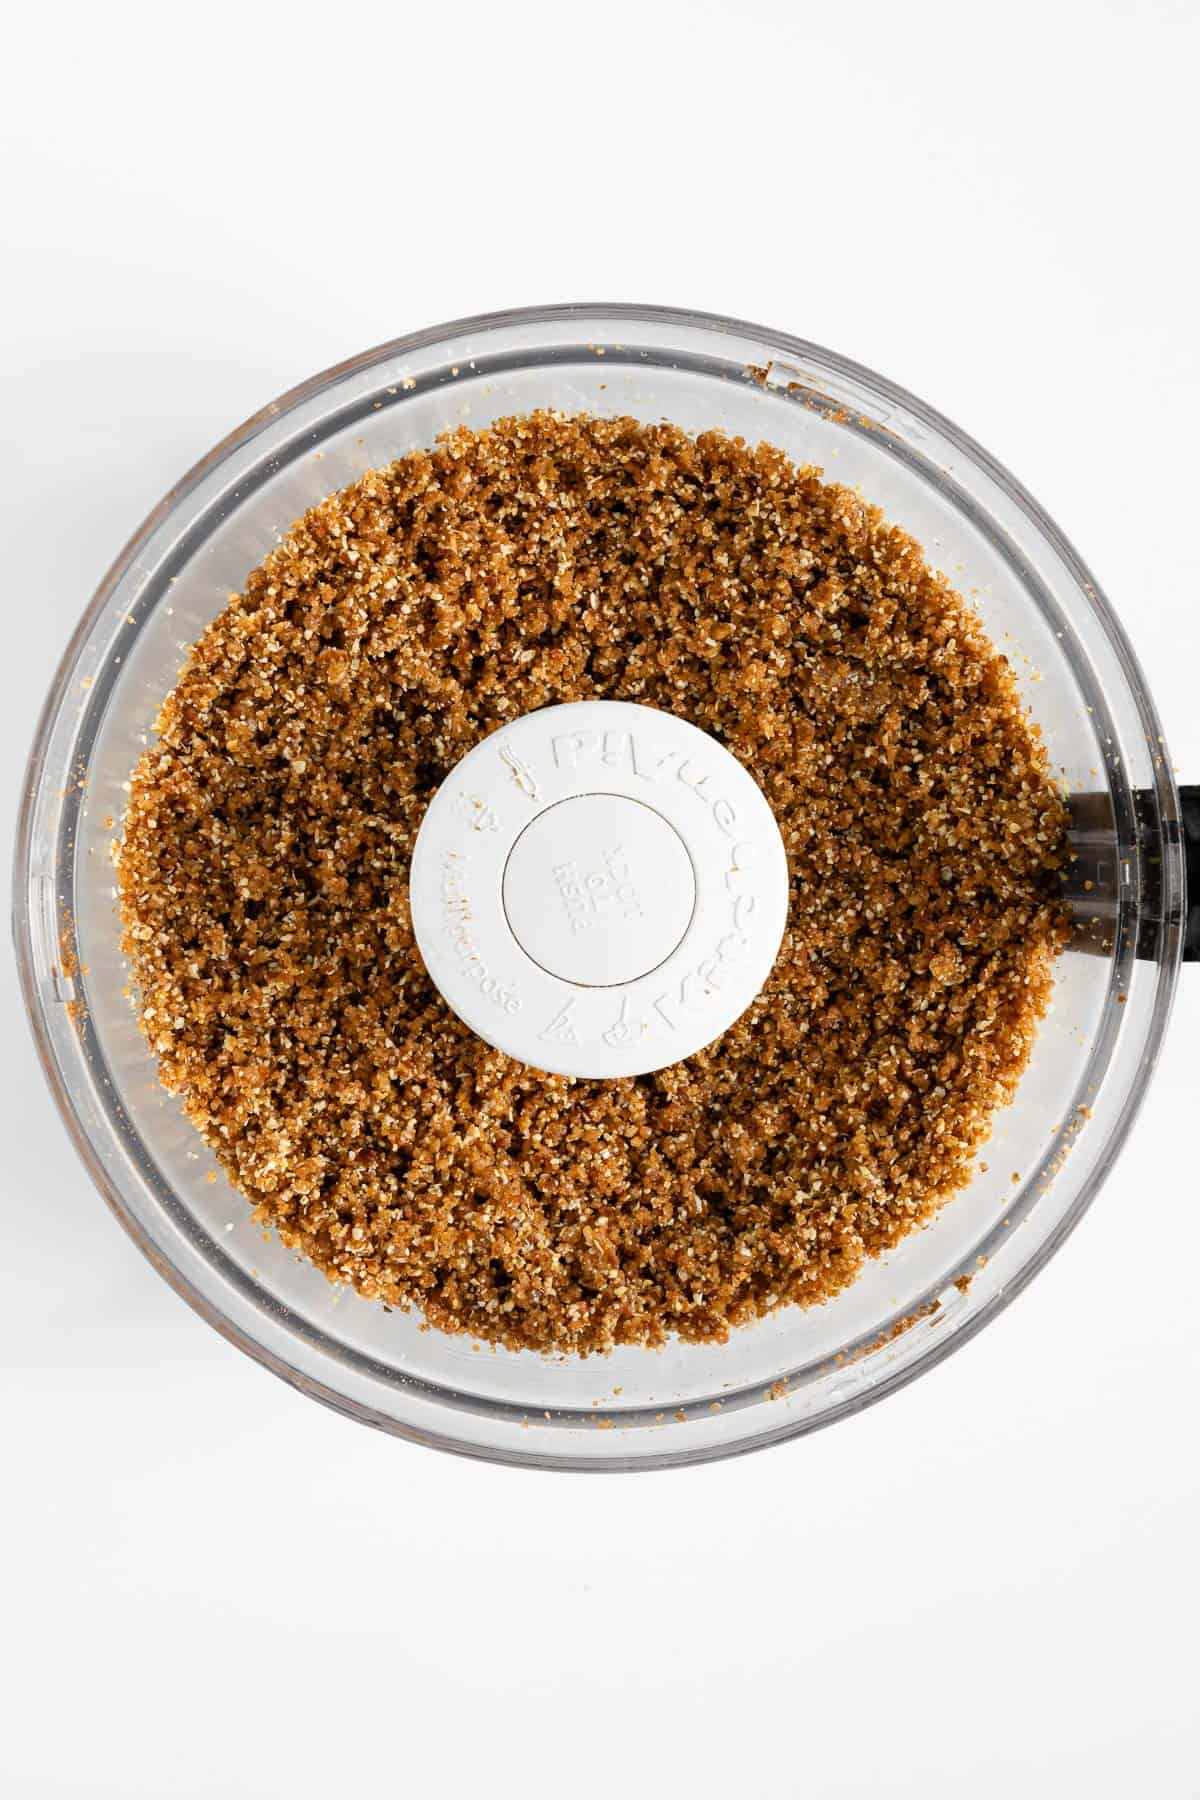 blended date and nut mixture inside the bowl of a food processor